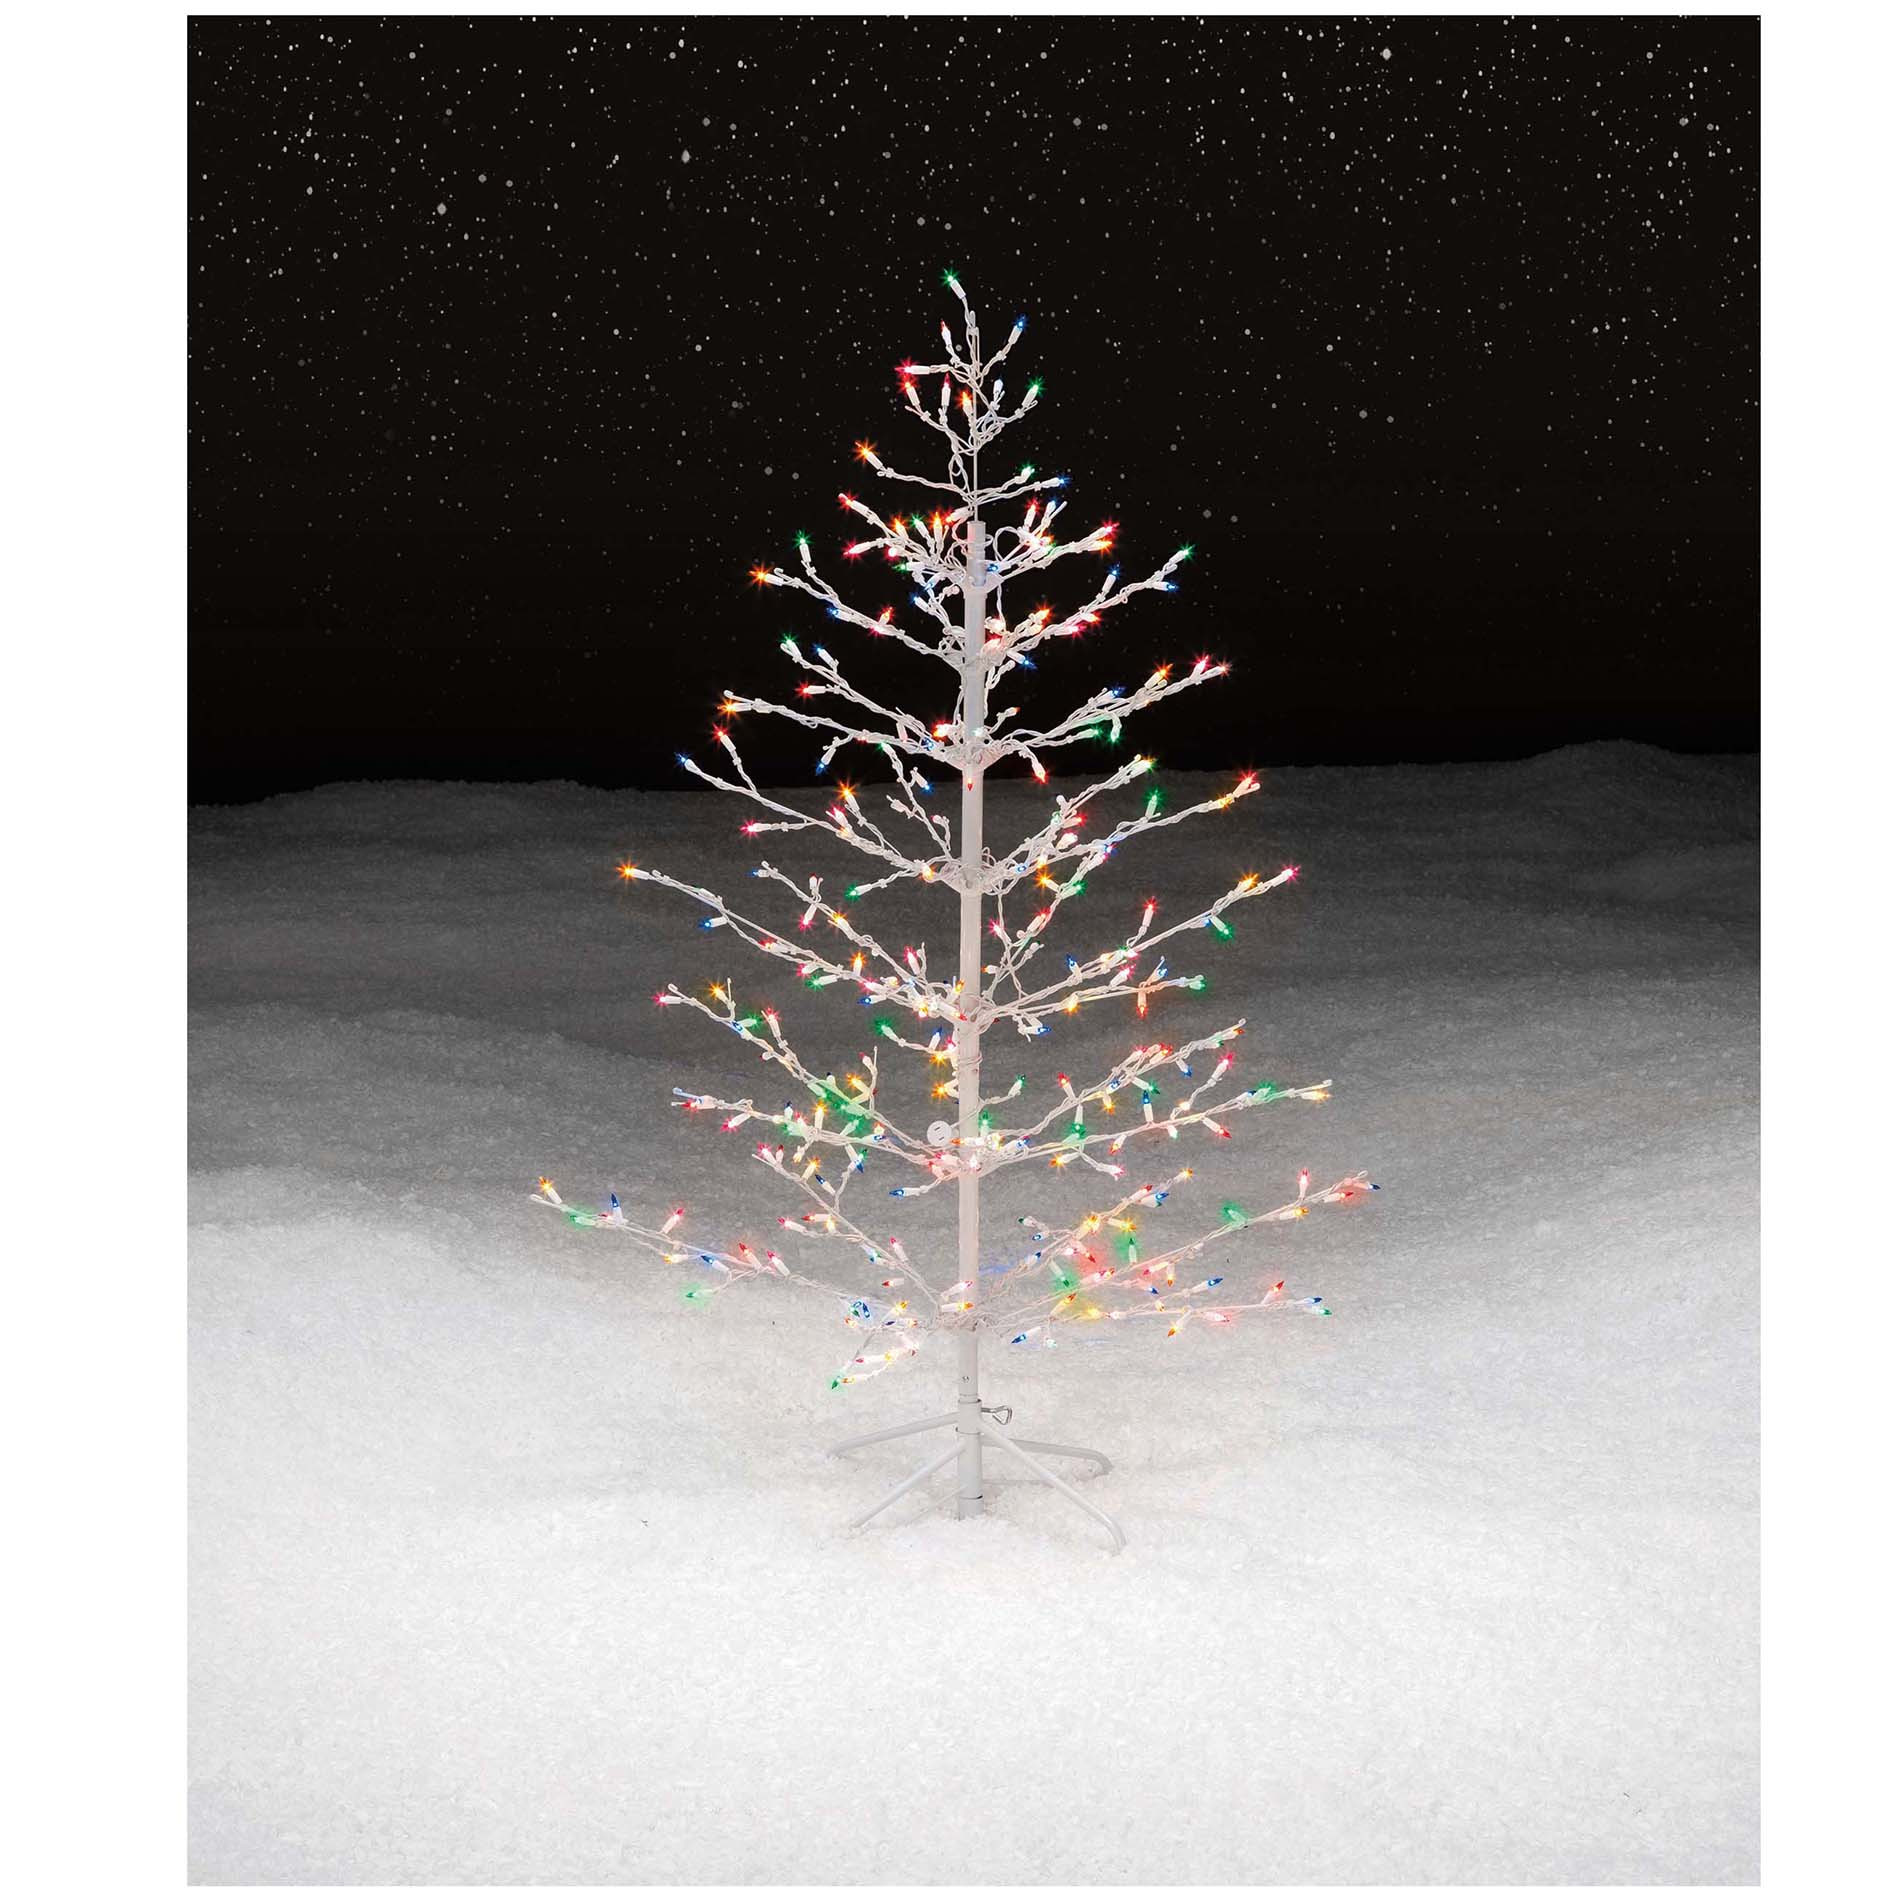 Outdoor Christmas Tree
 Christmas Tree Spiral Lighted Holiday Decor Indoor Outdoor